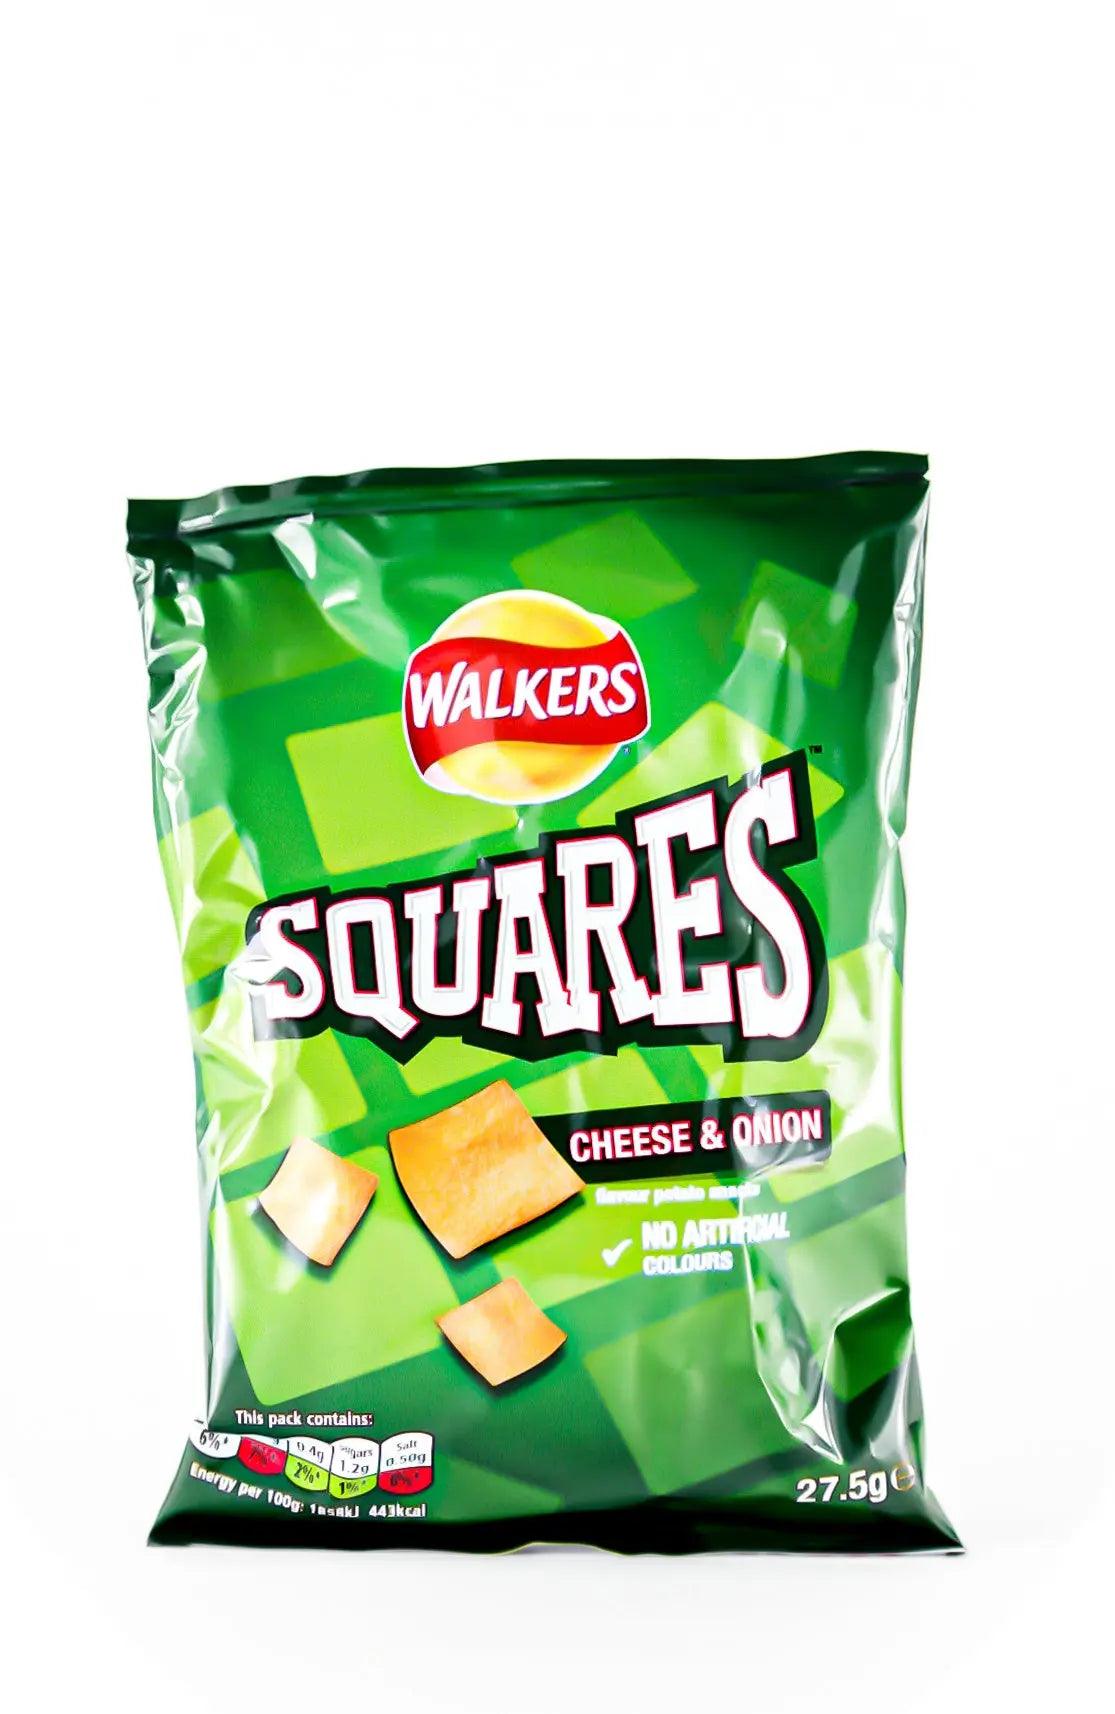 Walkers Squares cheese and onion - 27.5 g - Greens Essentials